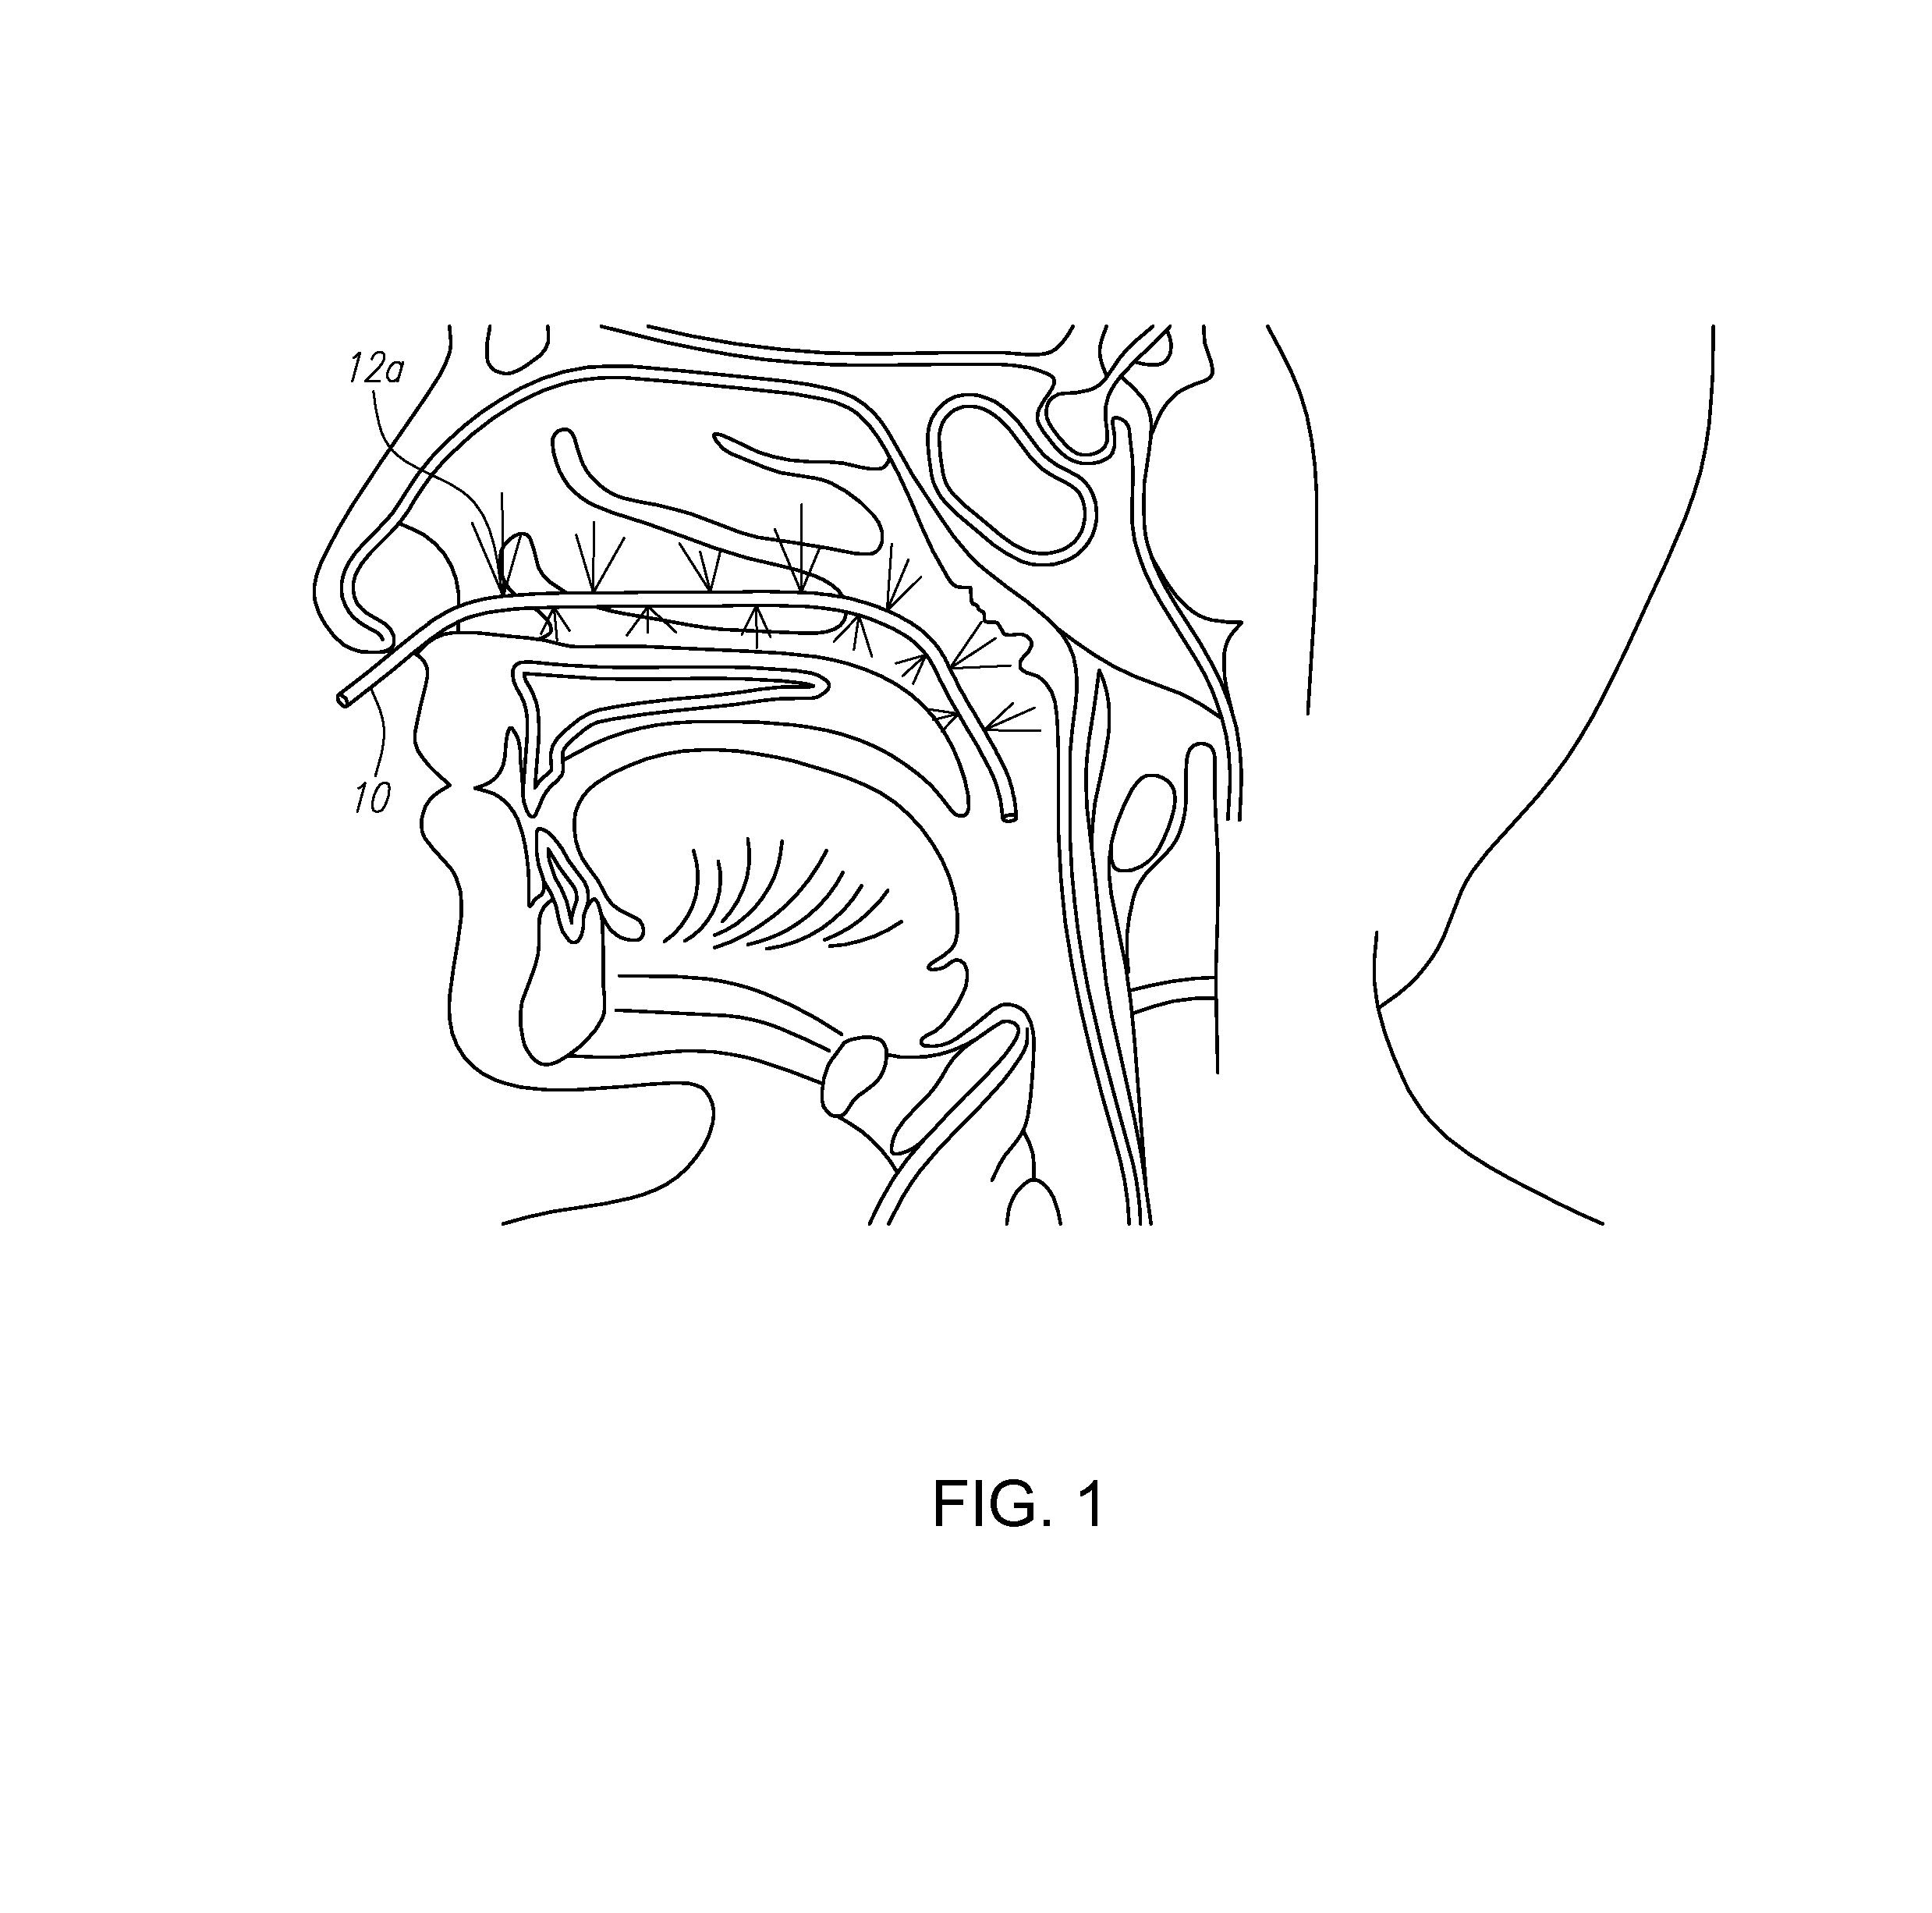 Methods and devices for non-invasive cerebral and systemic cooling alternating liquid mist/gas for induction and gas for maintenance